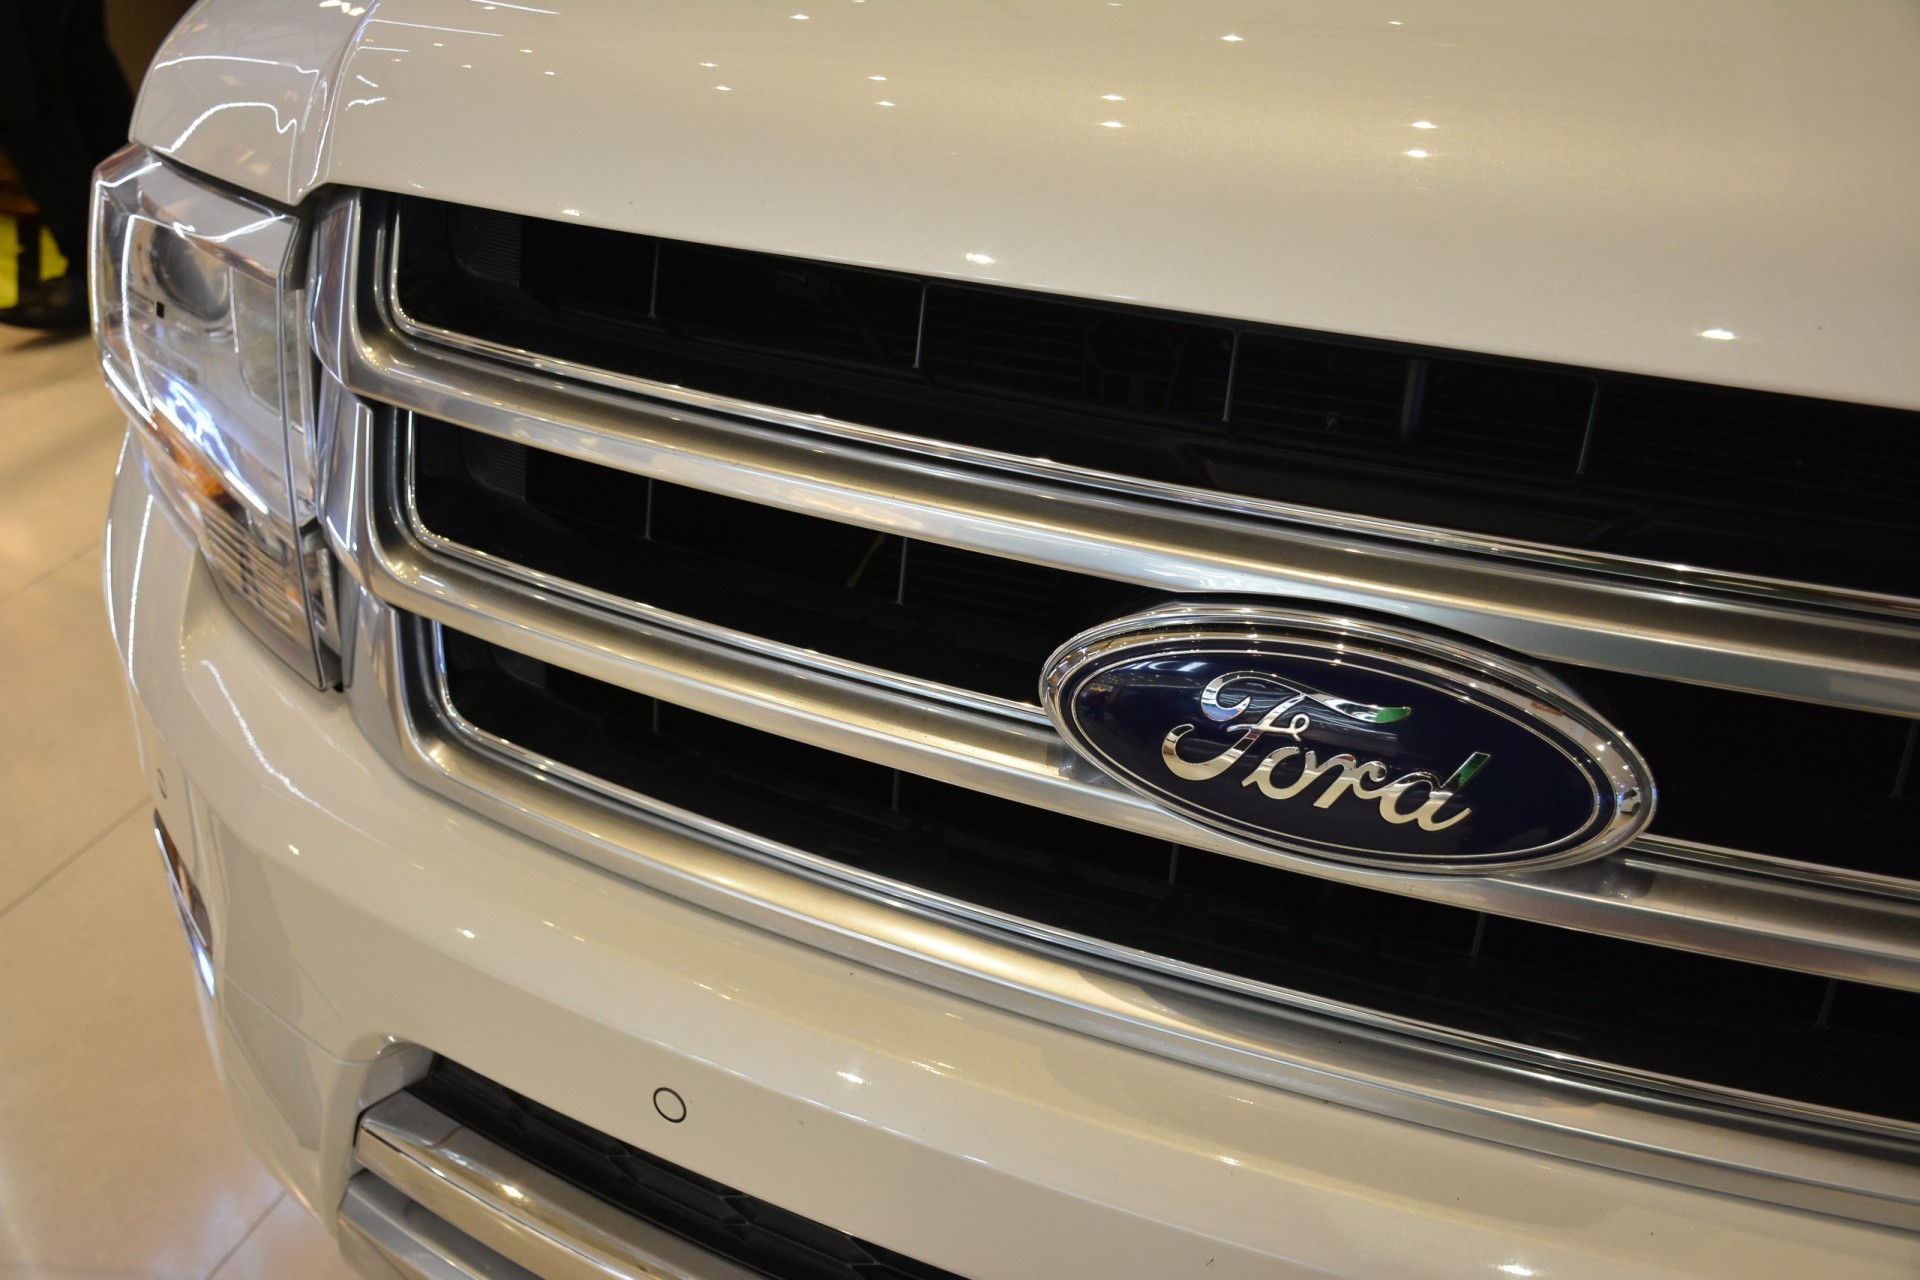 Ford Logo on the grille of Ford Expedition vehicle